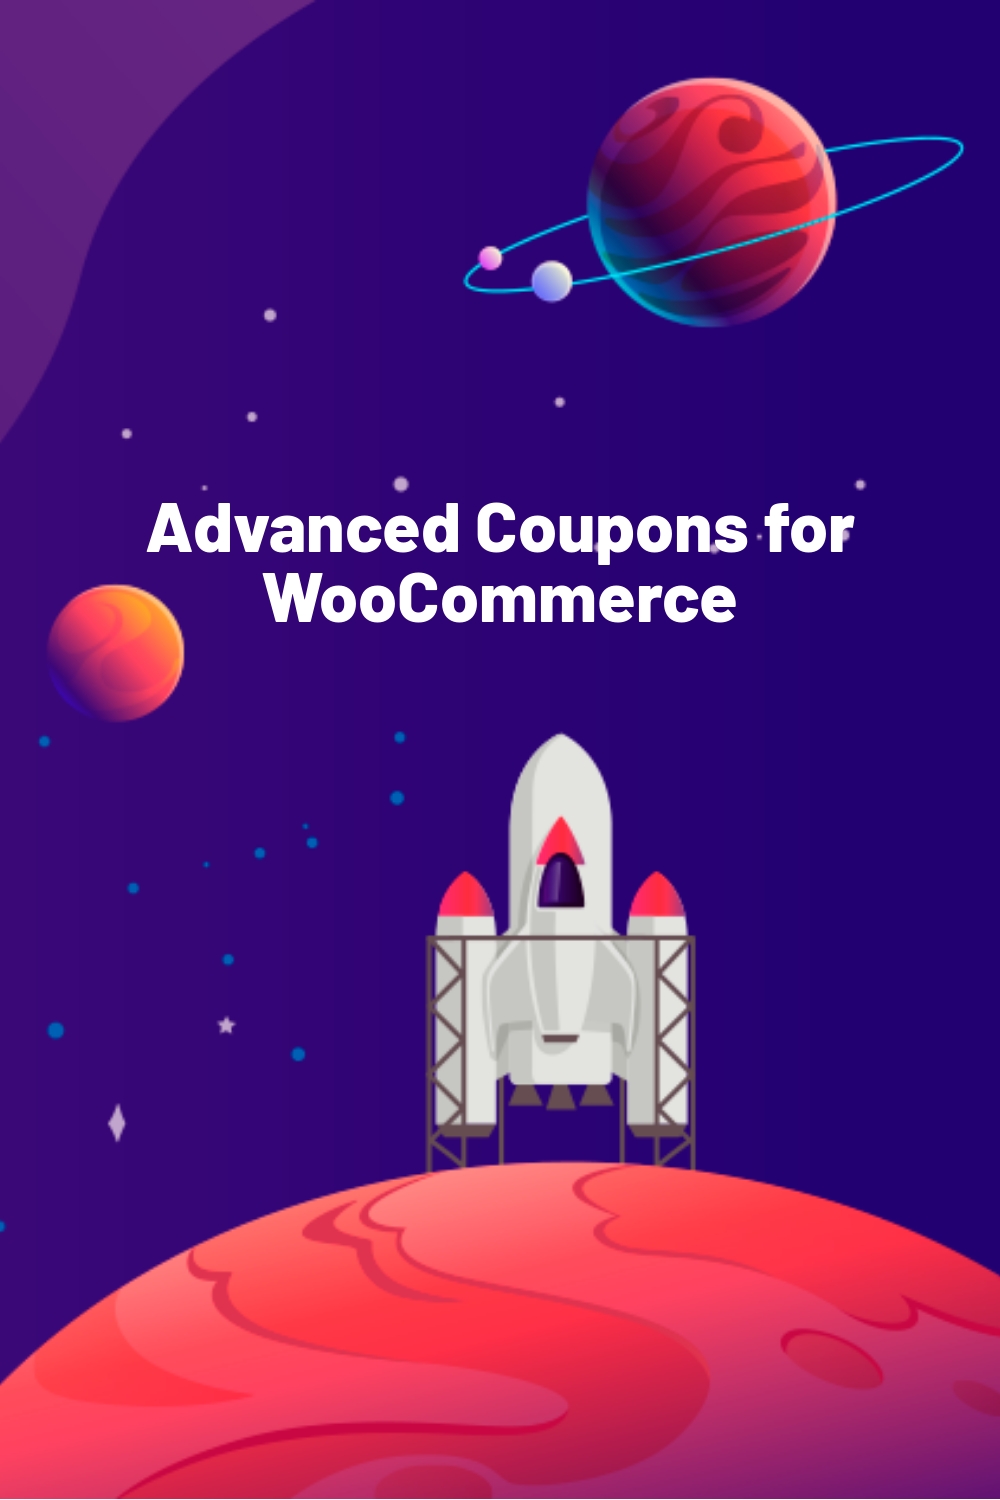 Advanced Coupons for WooCommerce